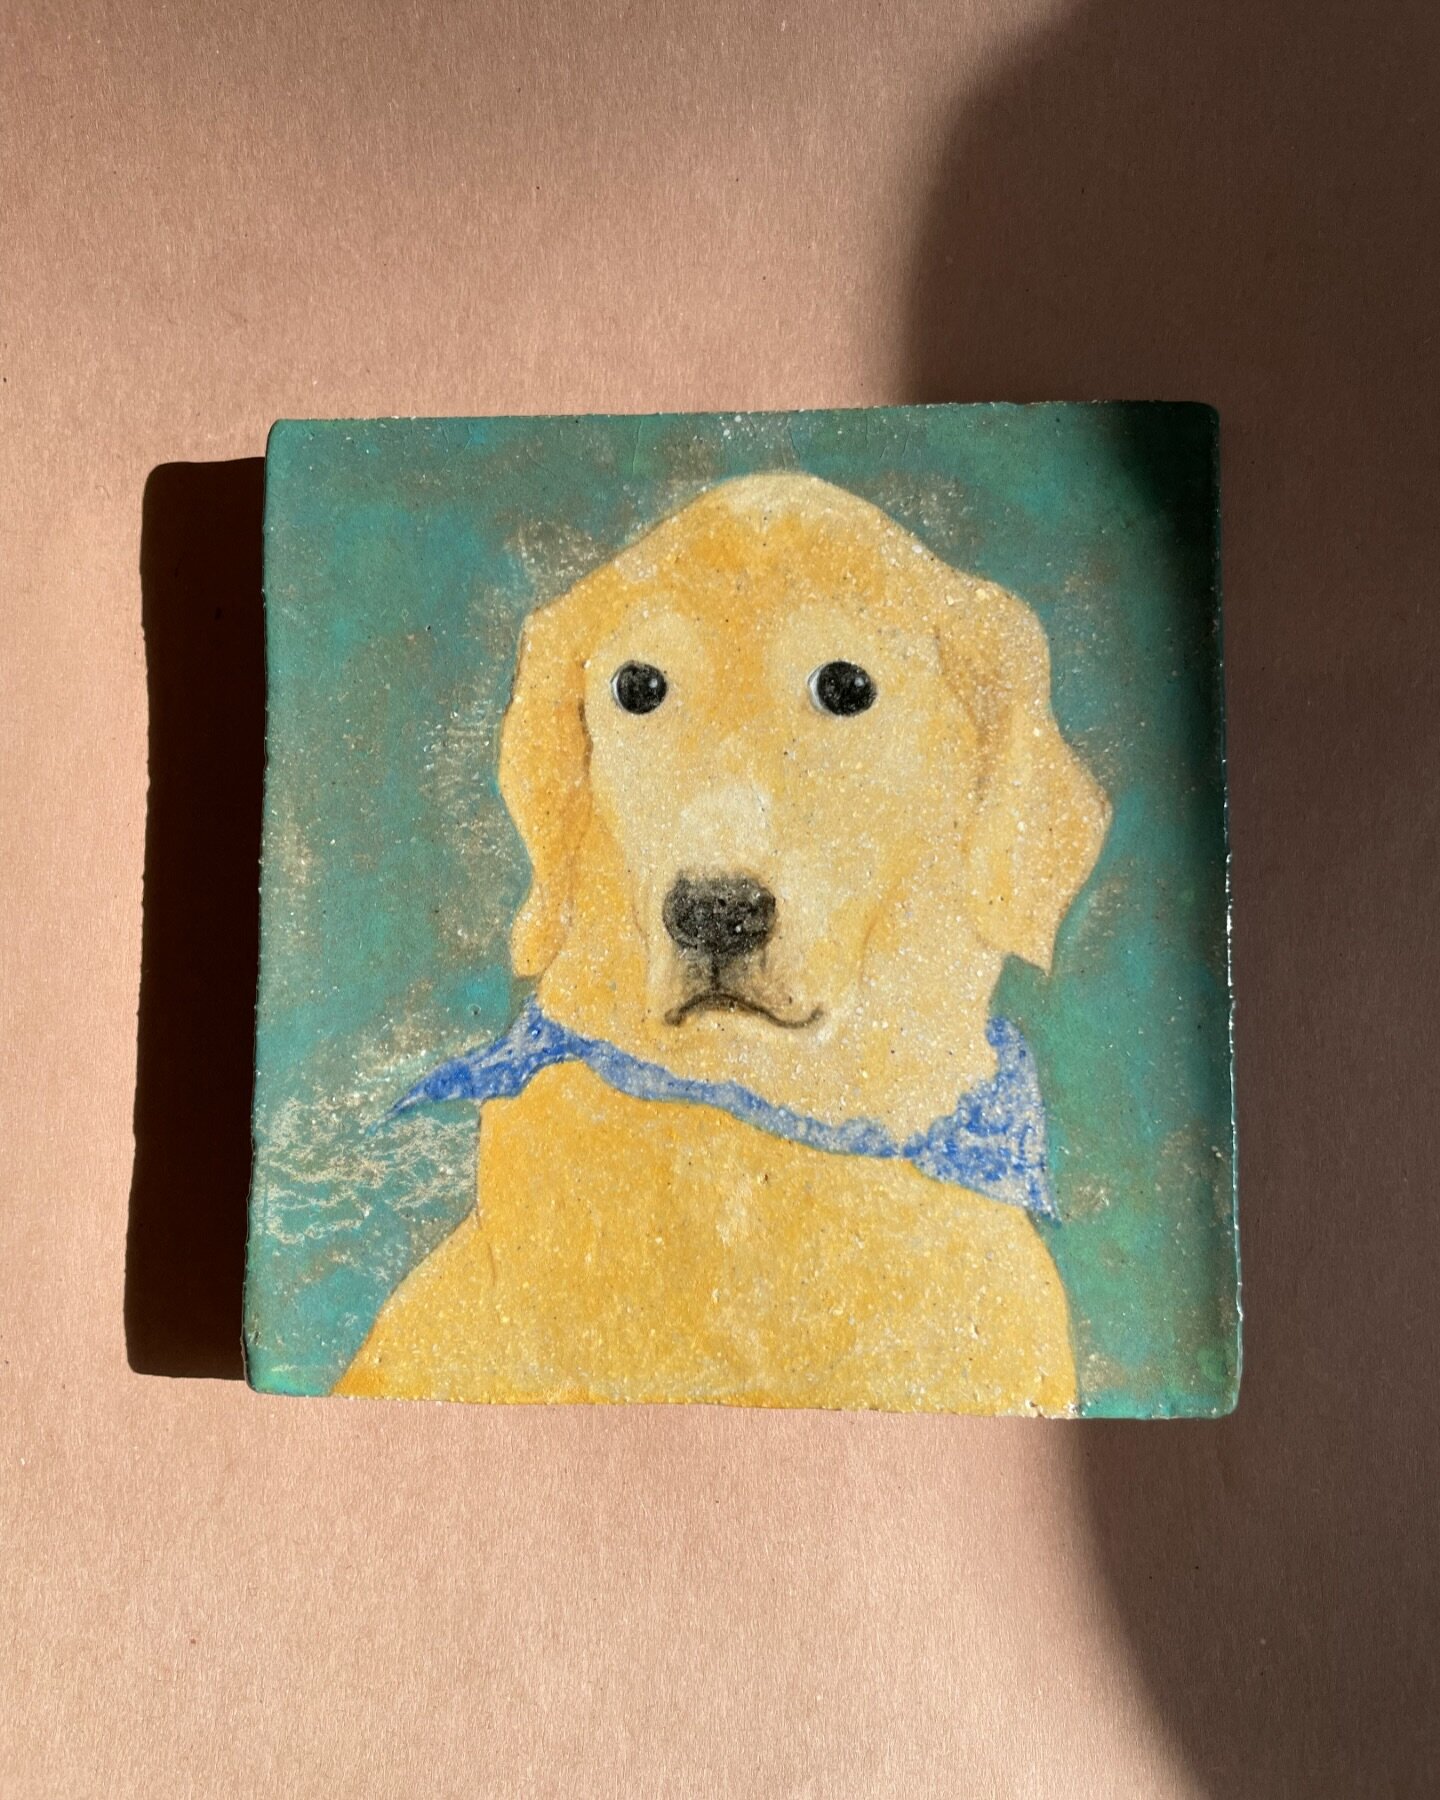 Bao. ❤️🐶 Pet tile painting for @shopboswell 2023.